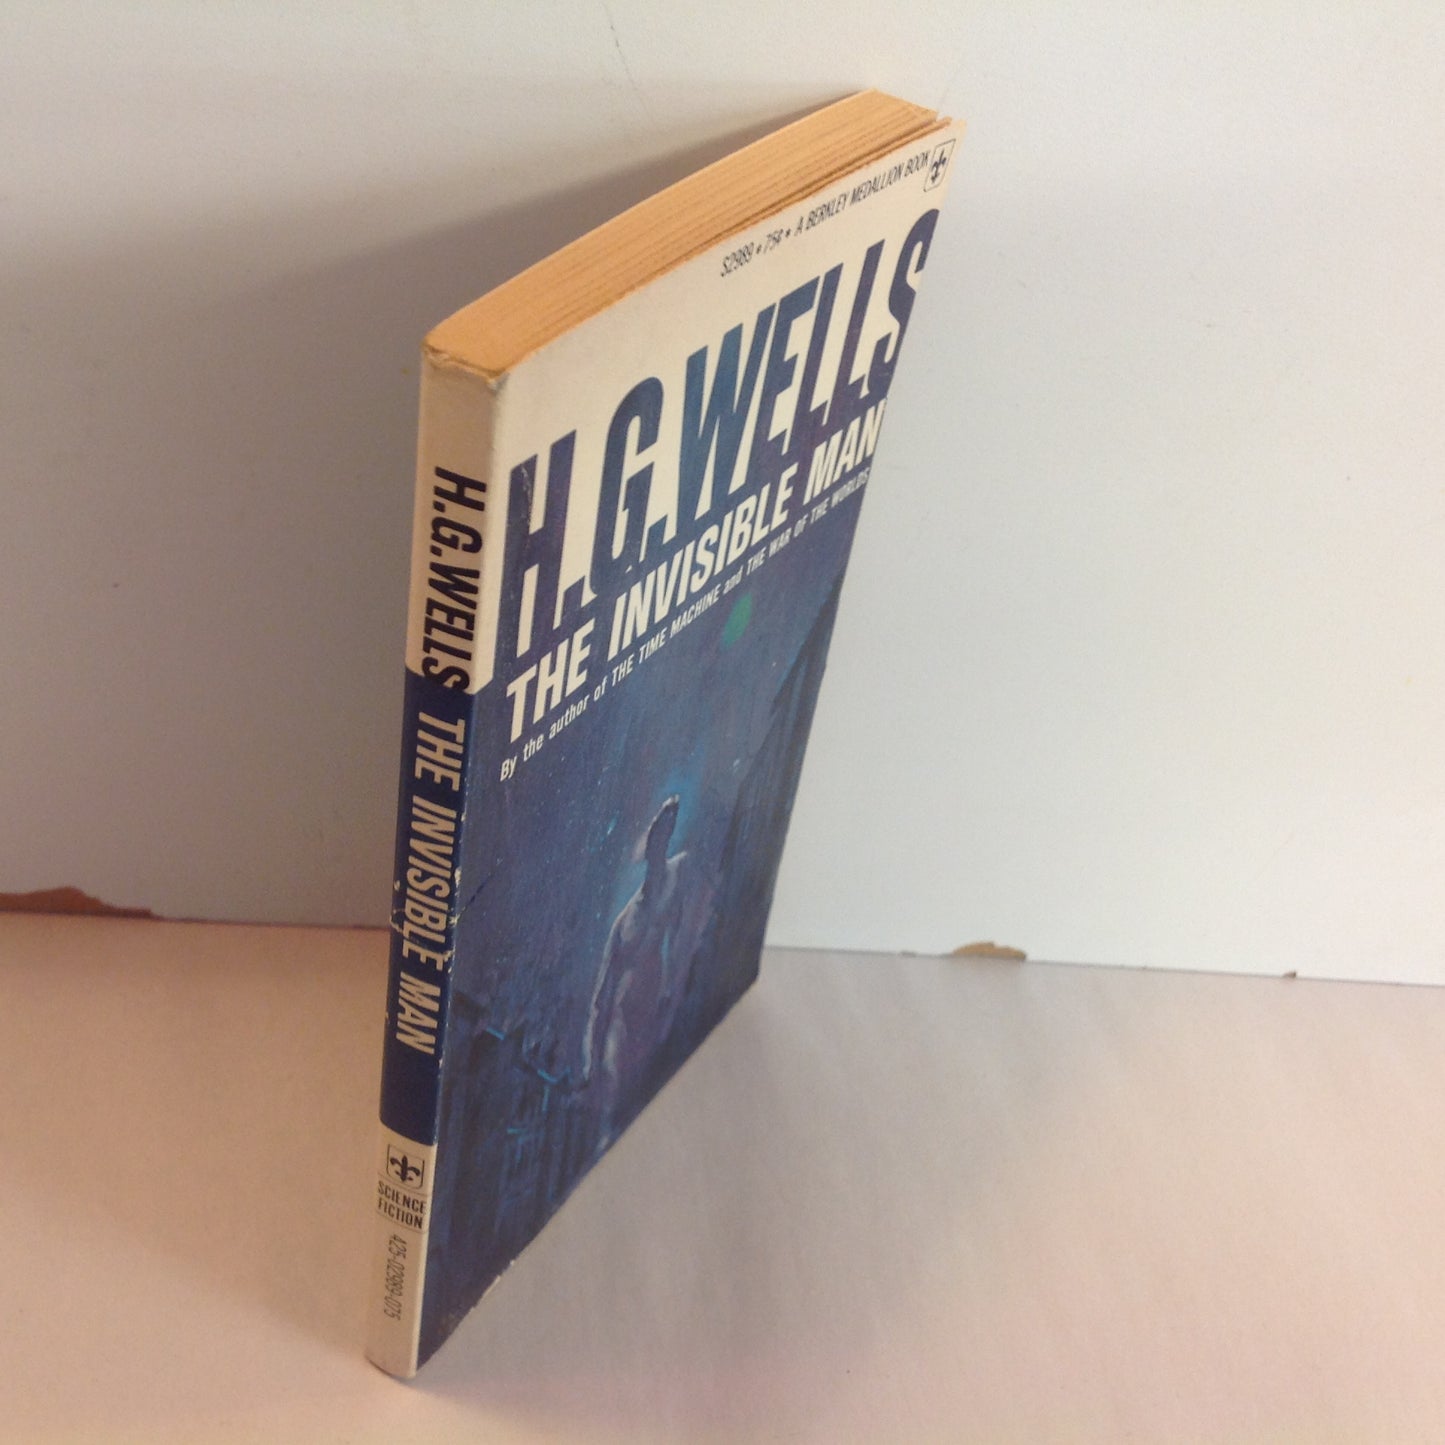 Vintage 1964 Mass Market Paperback The Invisible Man H. G. Wells